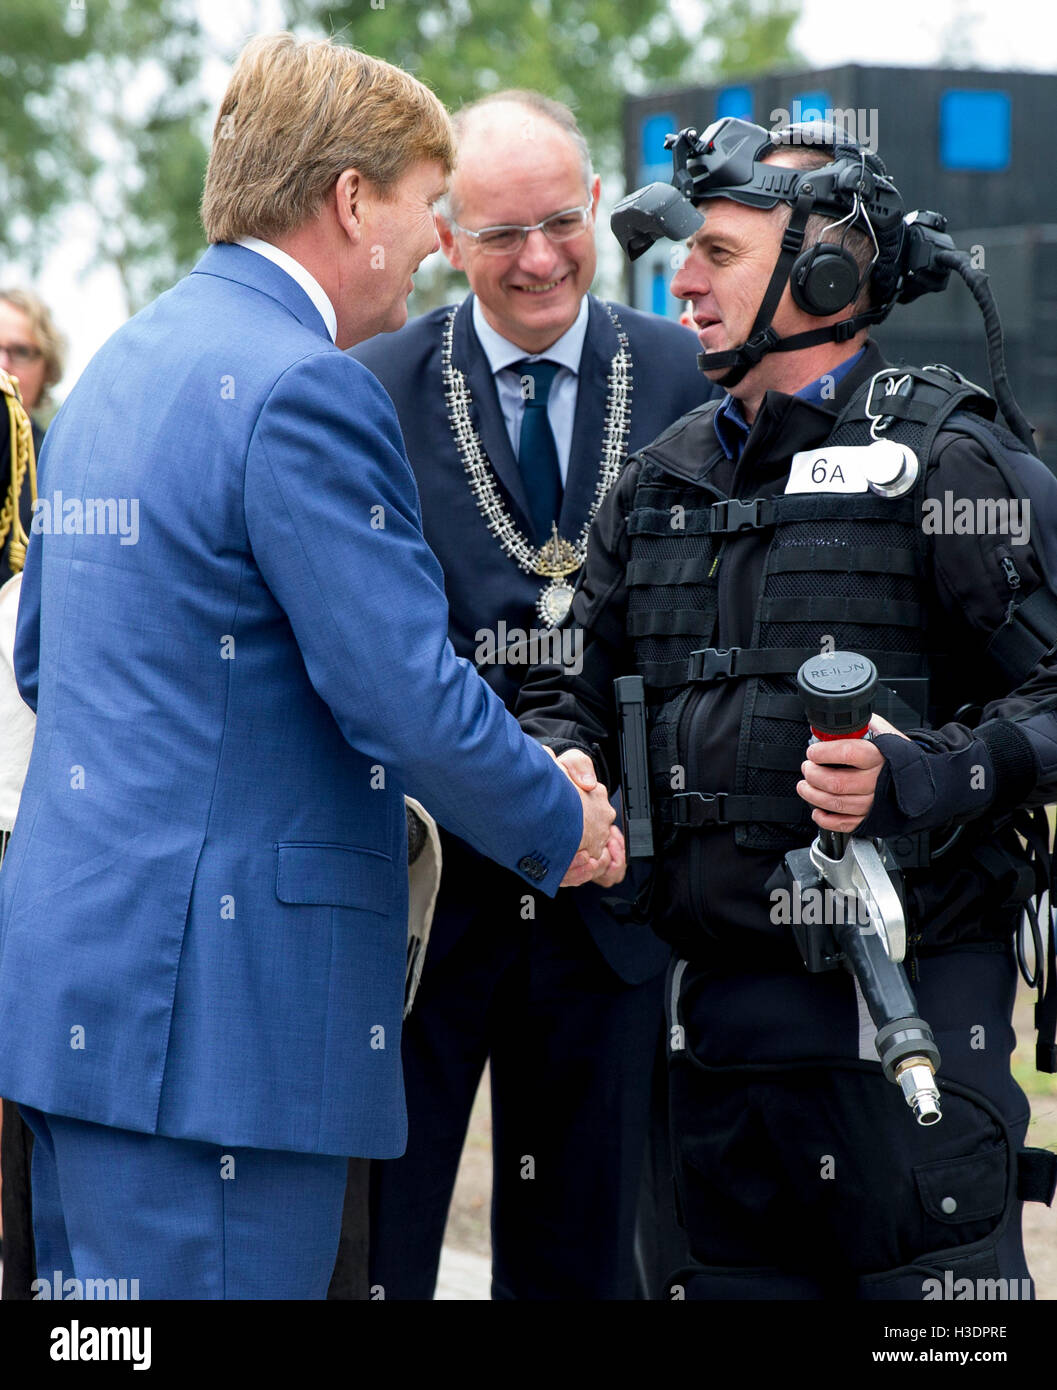 Deurningen, The Netherlands. 6th Oct, 2016. King Willem-Alexander of The Netherlands (L) visits the Twente Safety Campus in Deurningen, The Netherlands, 6 October 2016. At the campus school children and the elderly how to react in dangerous situations. Photo: Patrick van Katwijk//POINT DE VUE OUT/dpa/Alamy Live News Stock Photo